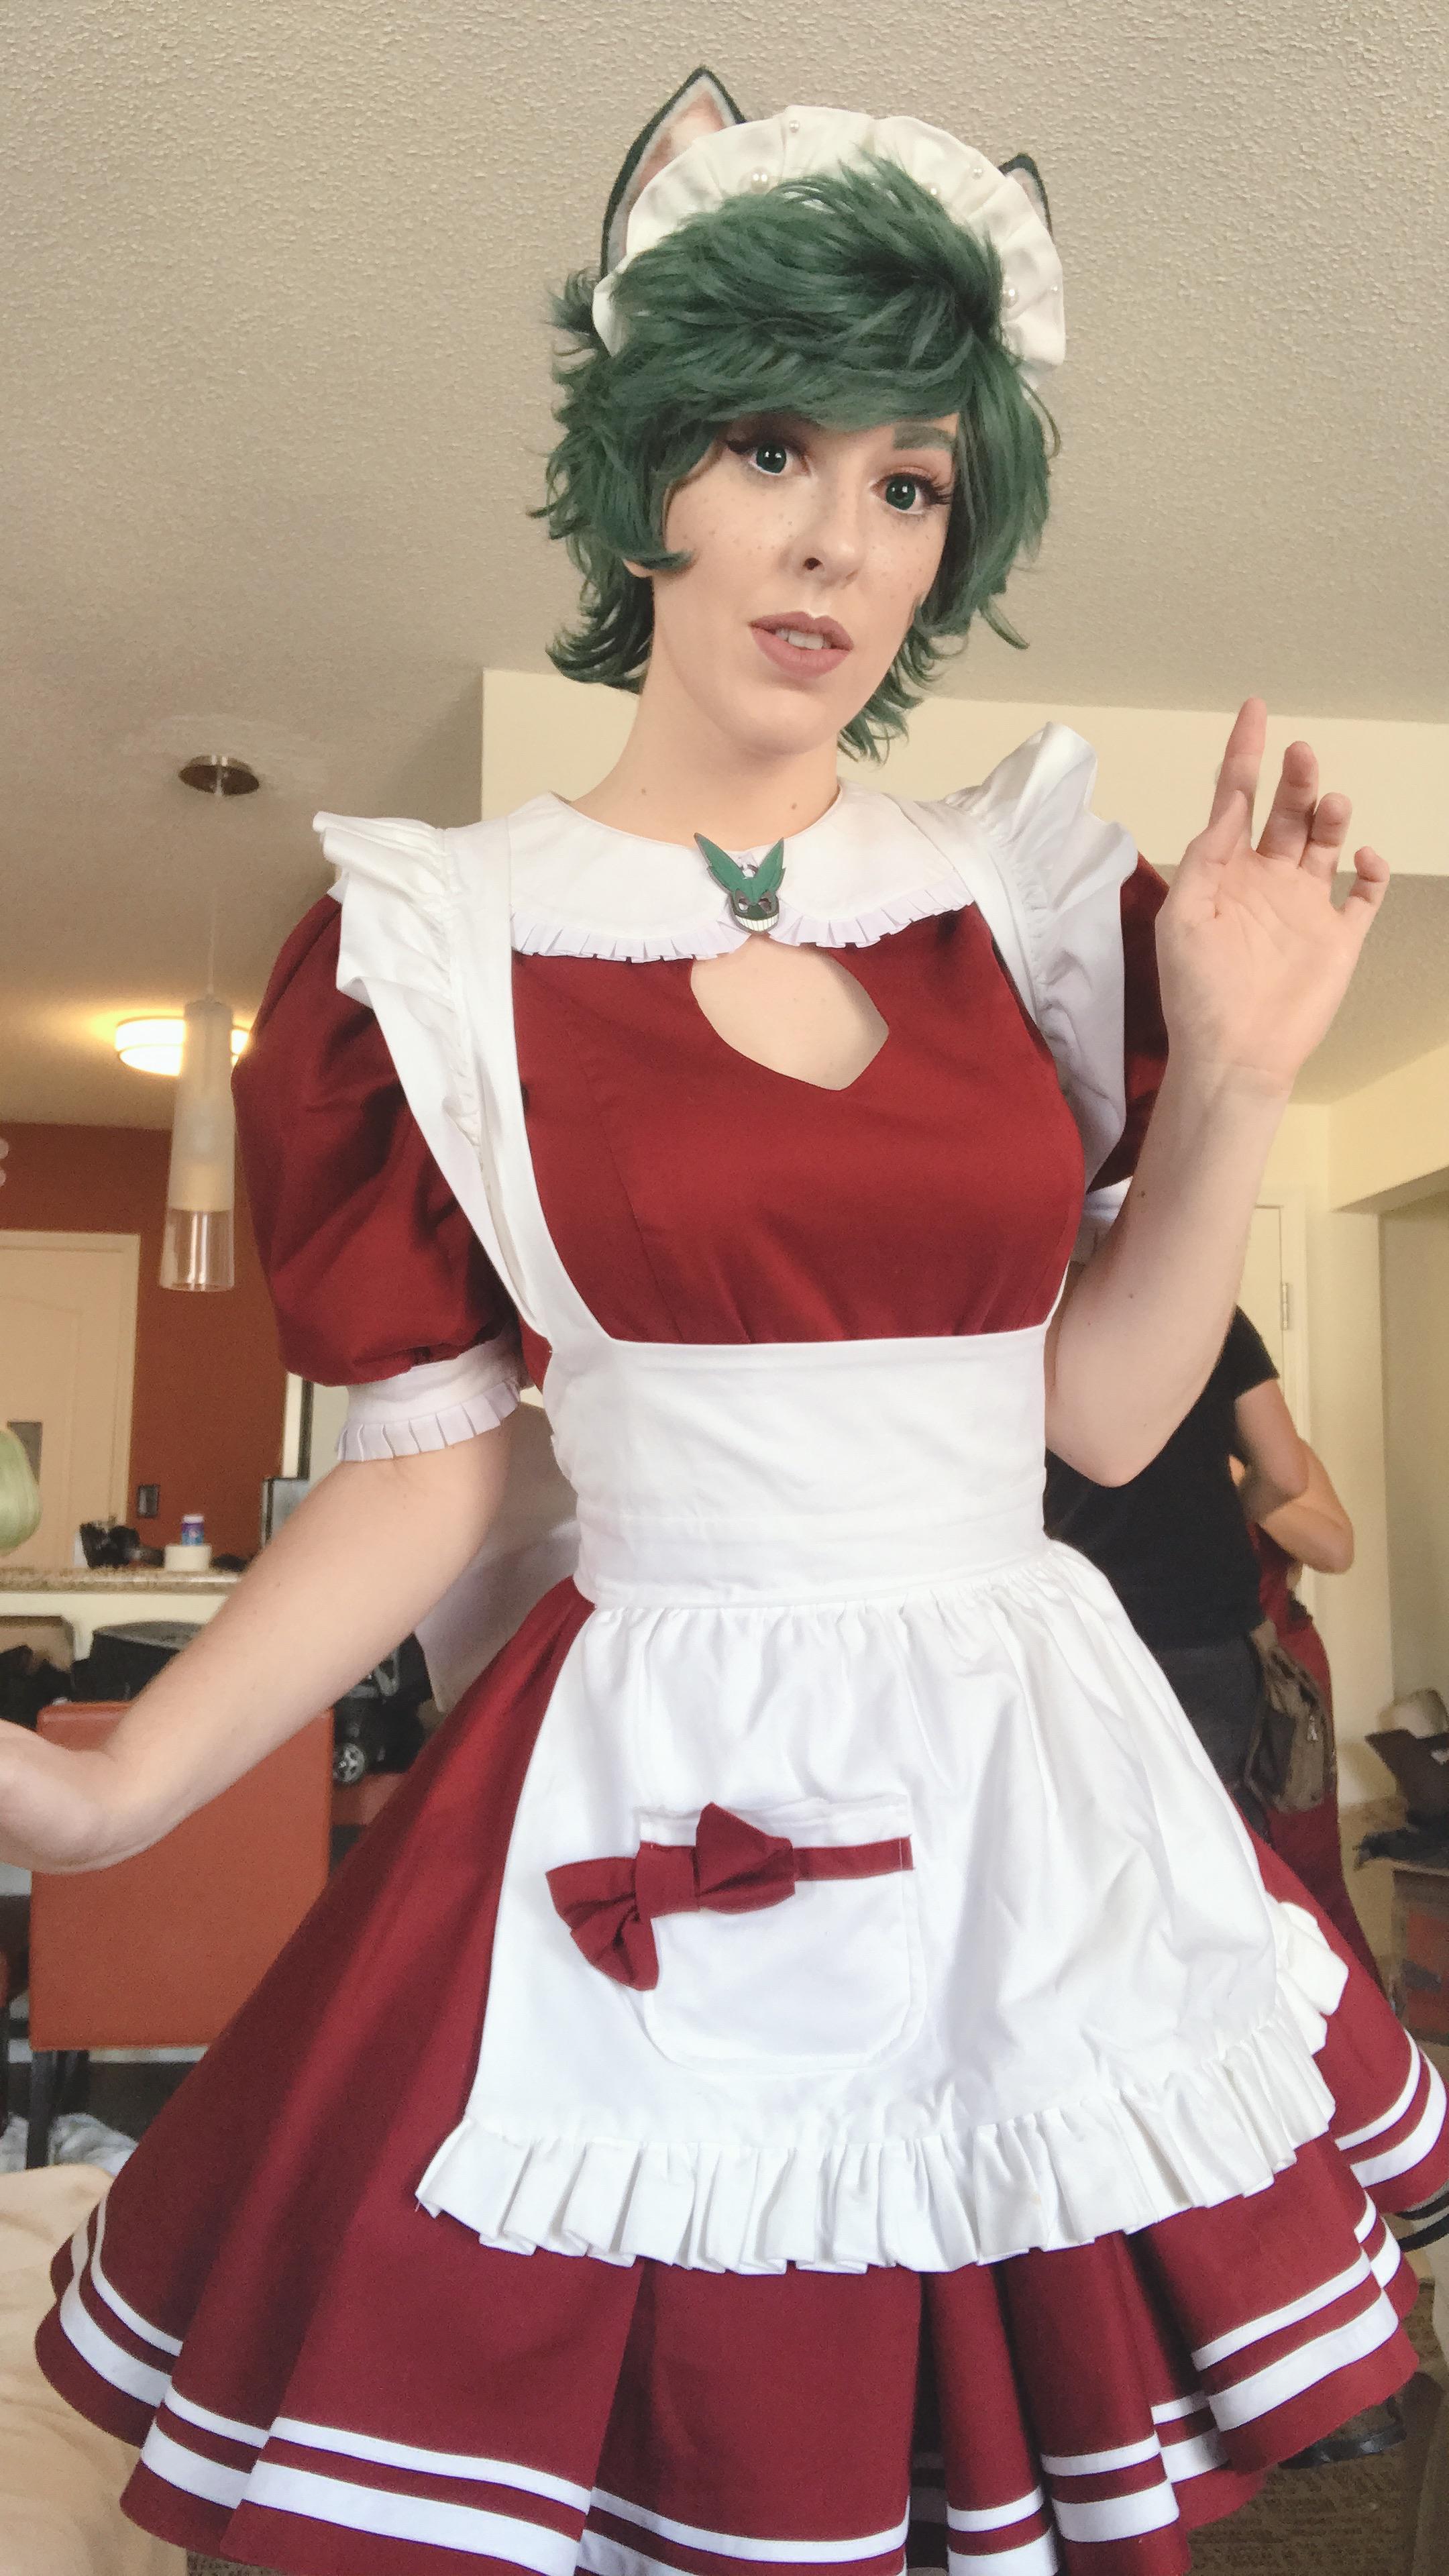 Female Maid Porn - View Female Maid Deku from My Hero Academia by HeartlessAquarius for free |  Simply-Cosplay